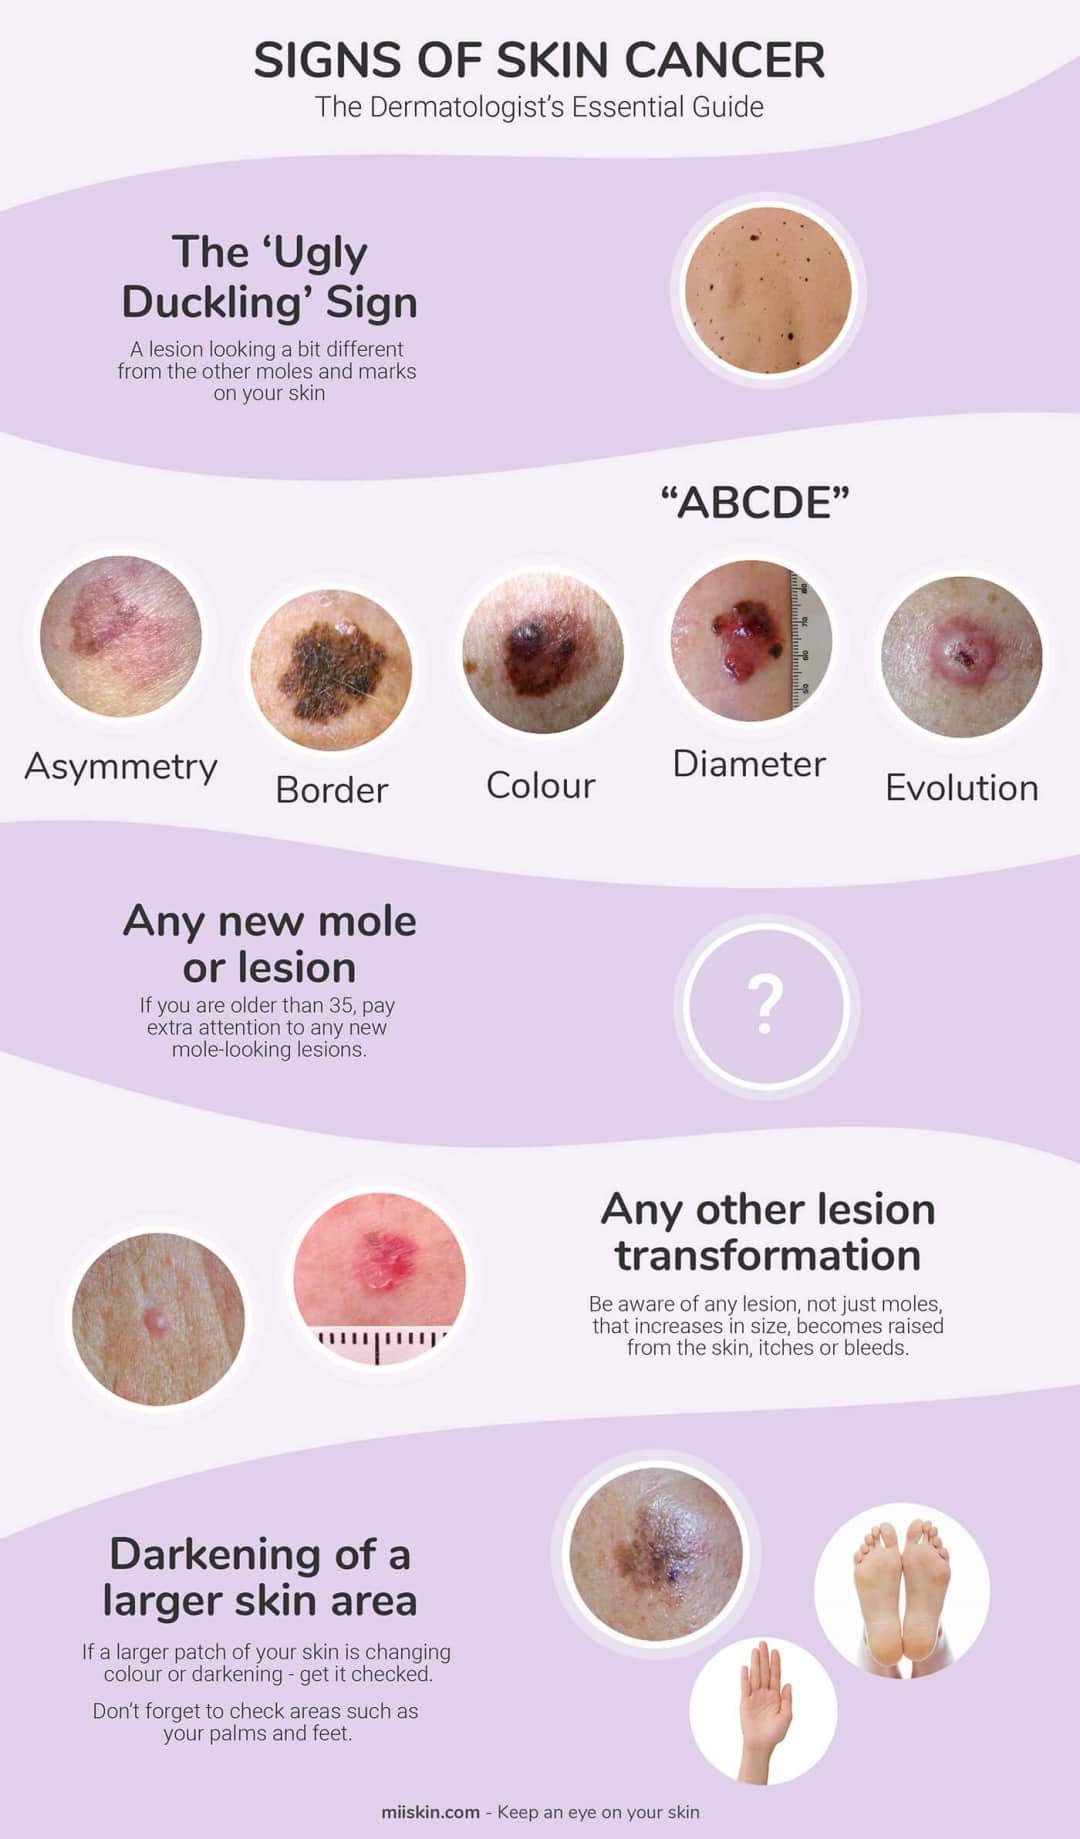 Skin Cancer Signs & Symptoms | The Dermatologist's Essential Guide